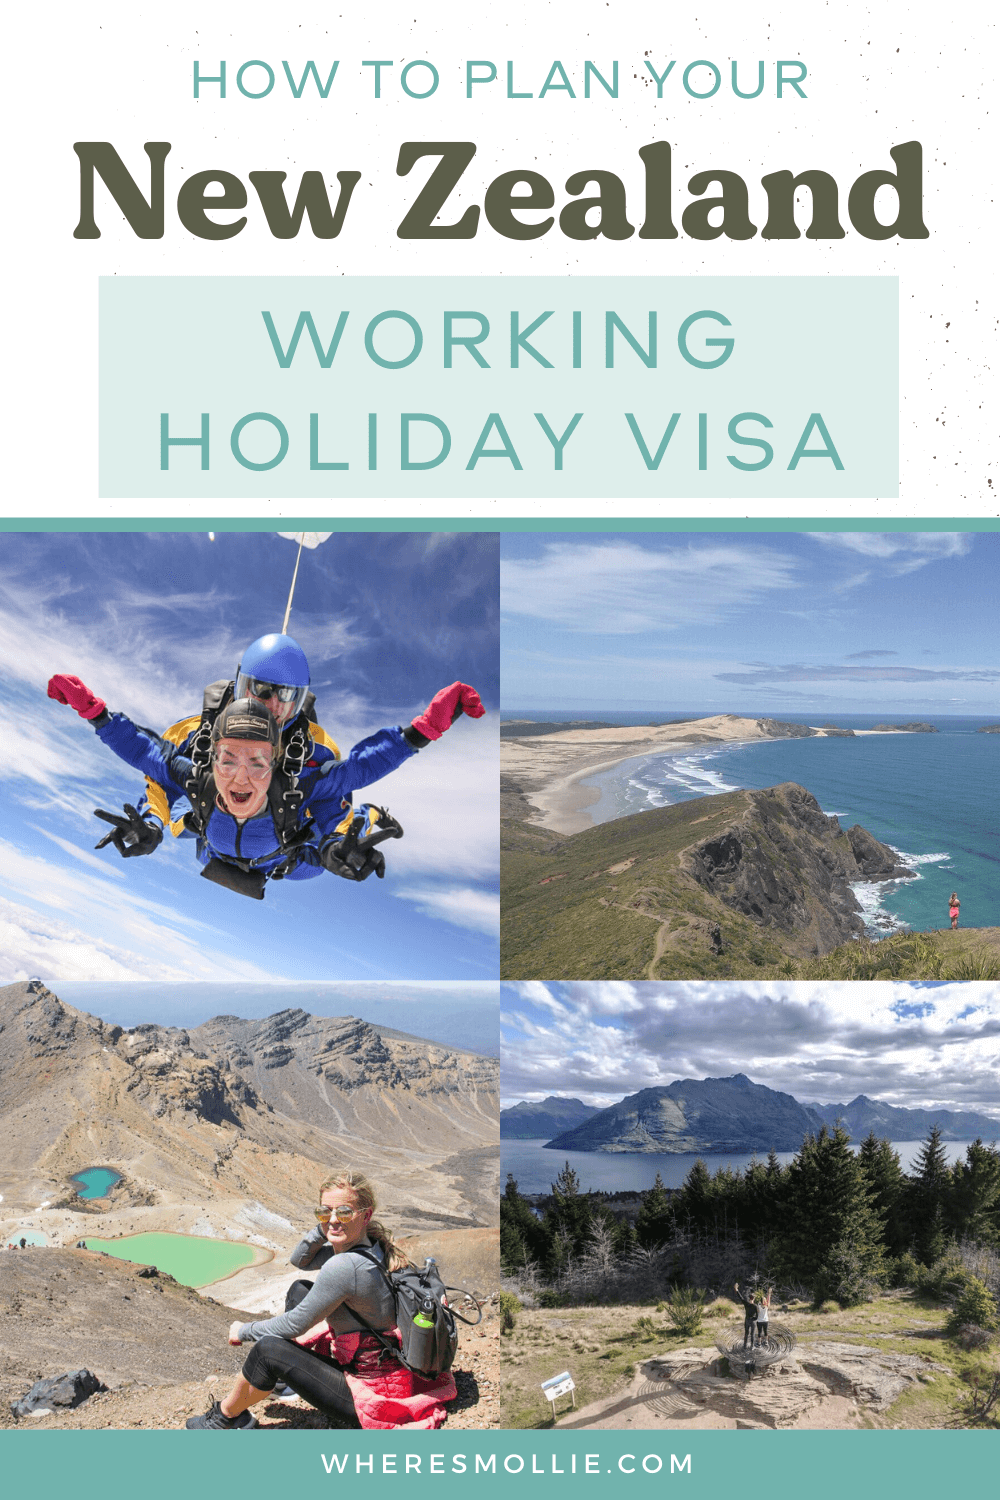 Working holiday visas in New Zealand: everything you need to know